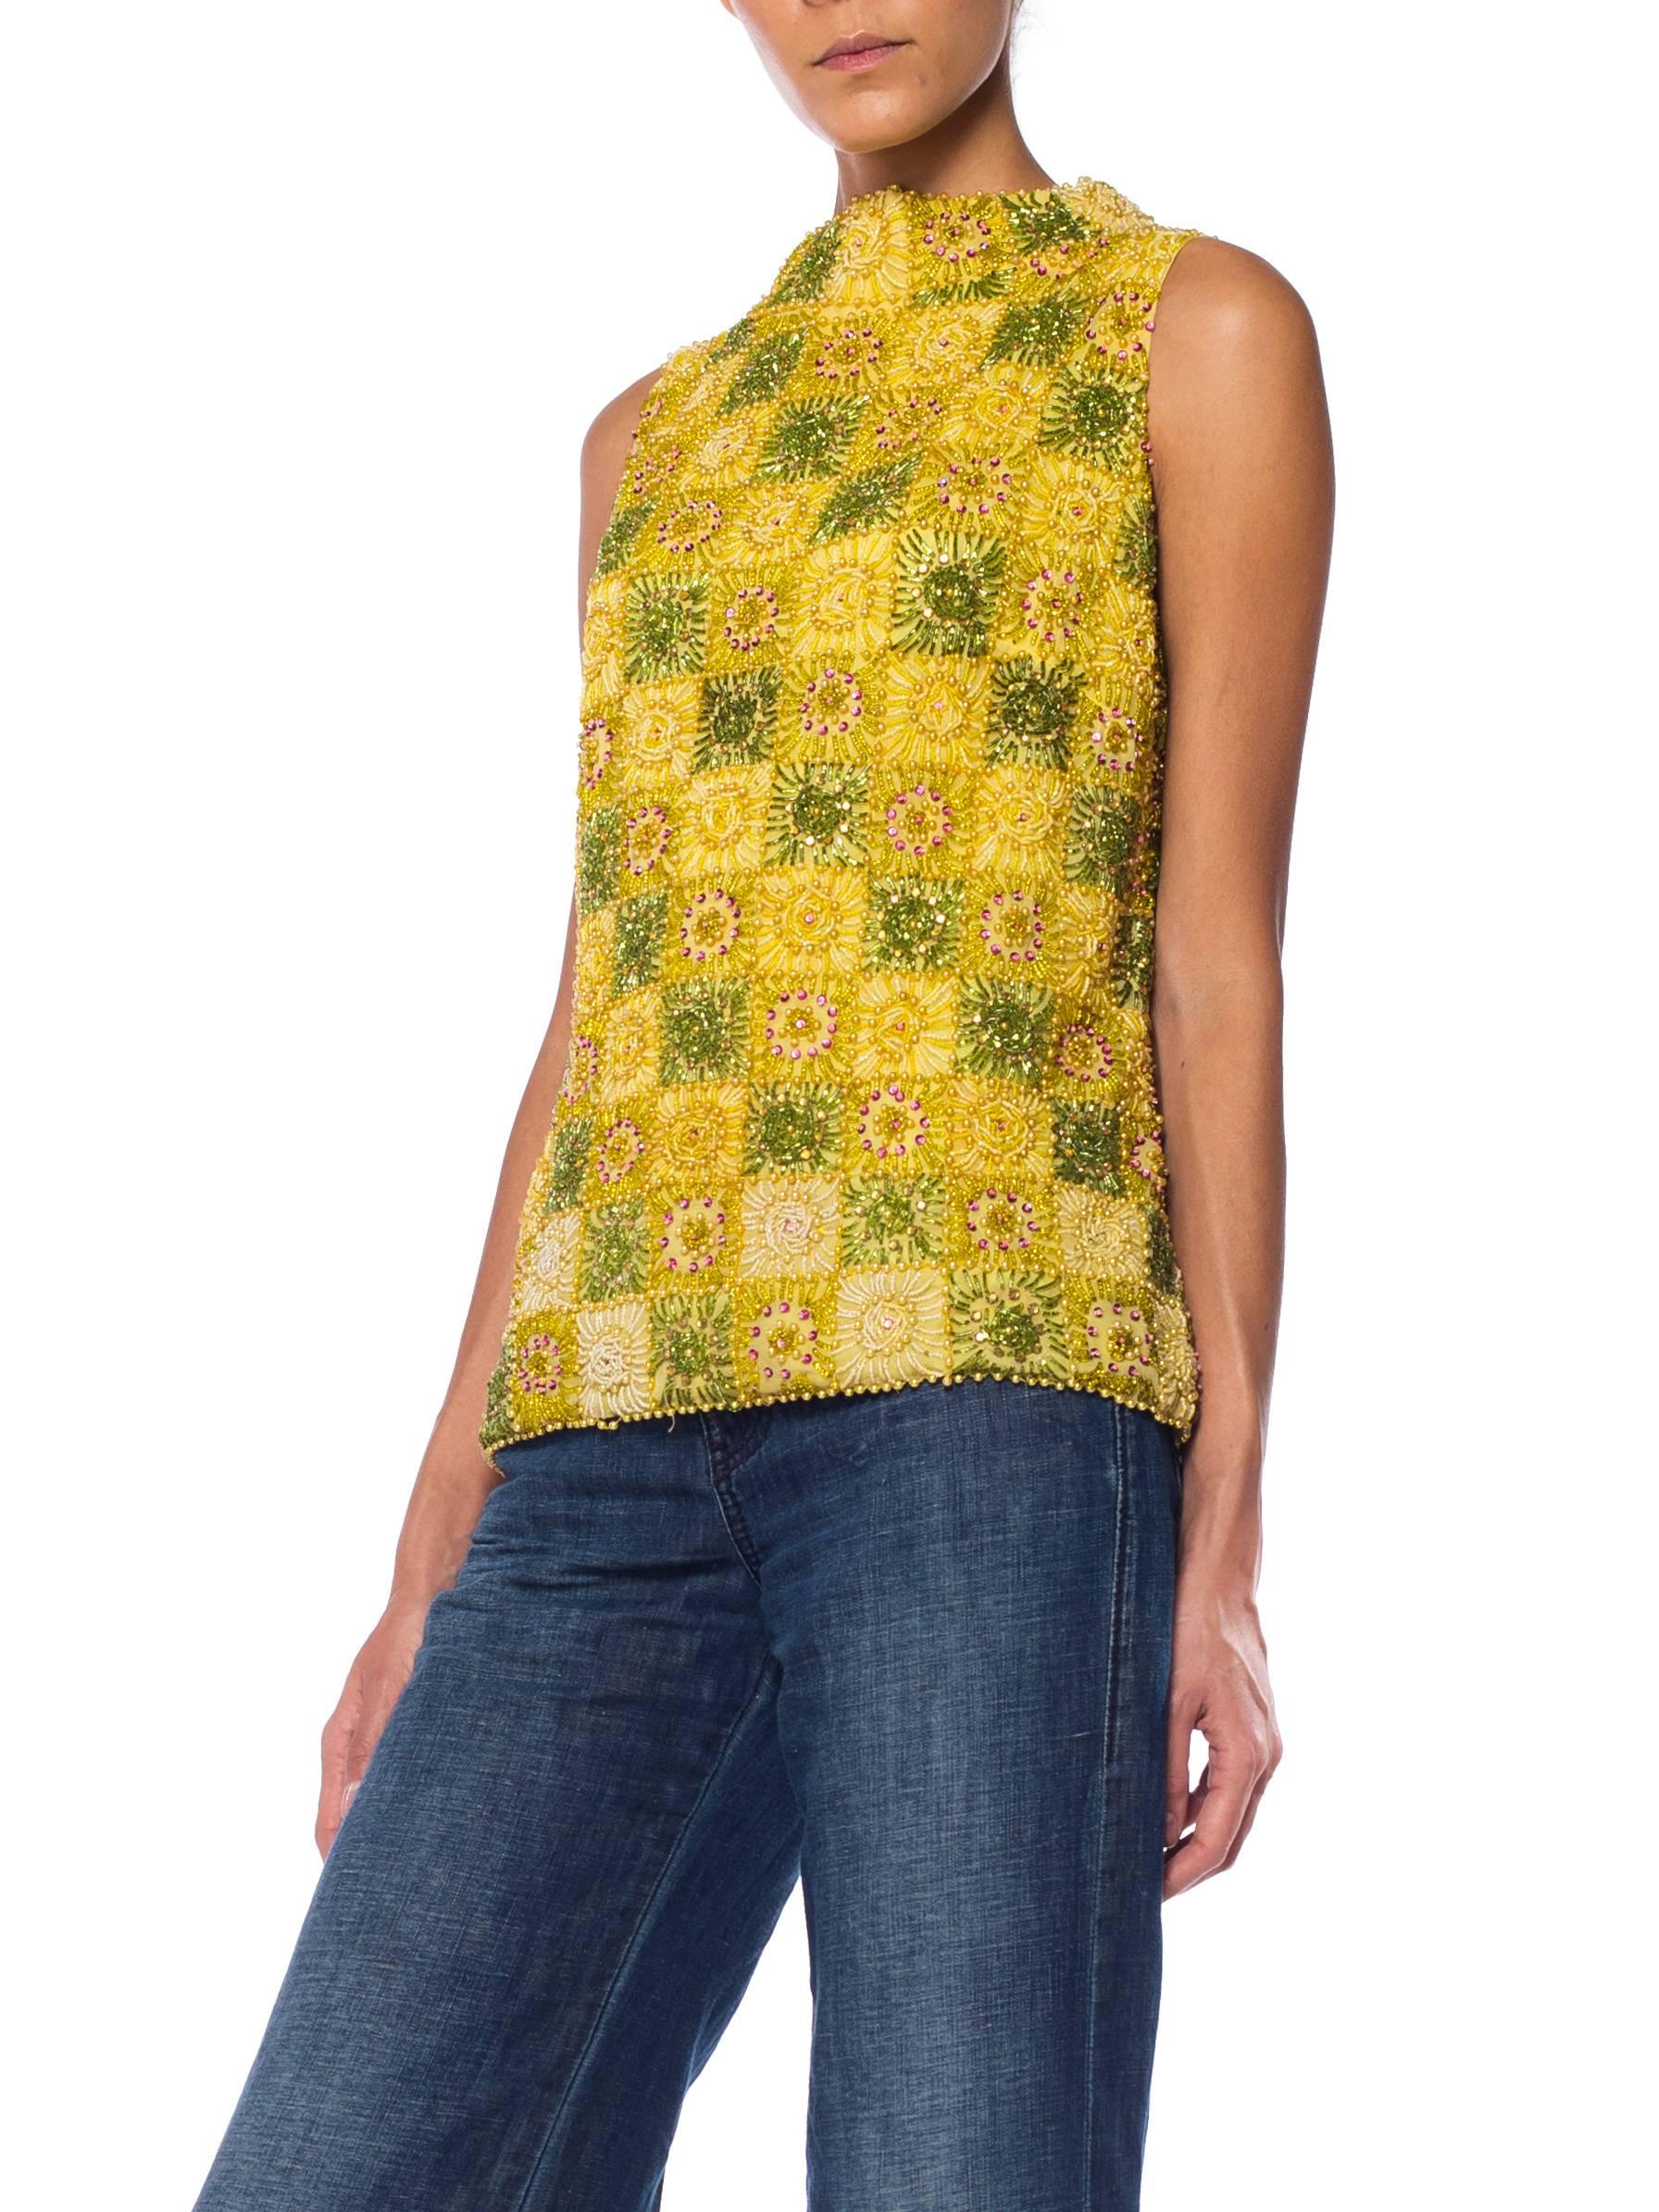 Women's 1960S Yellow Haute Couture Silk Mod Shell Top Fully Beaded With Crystals